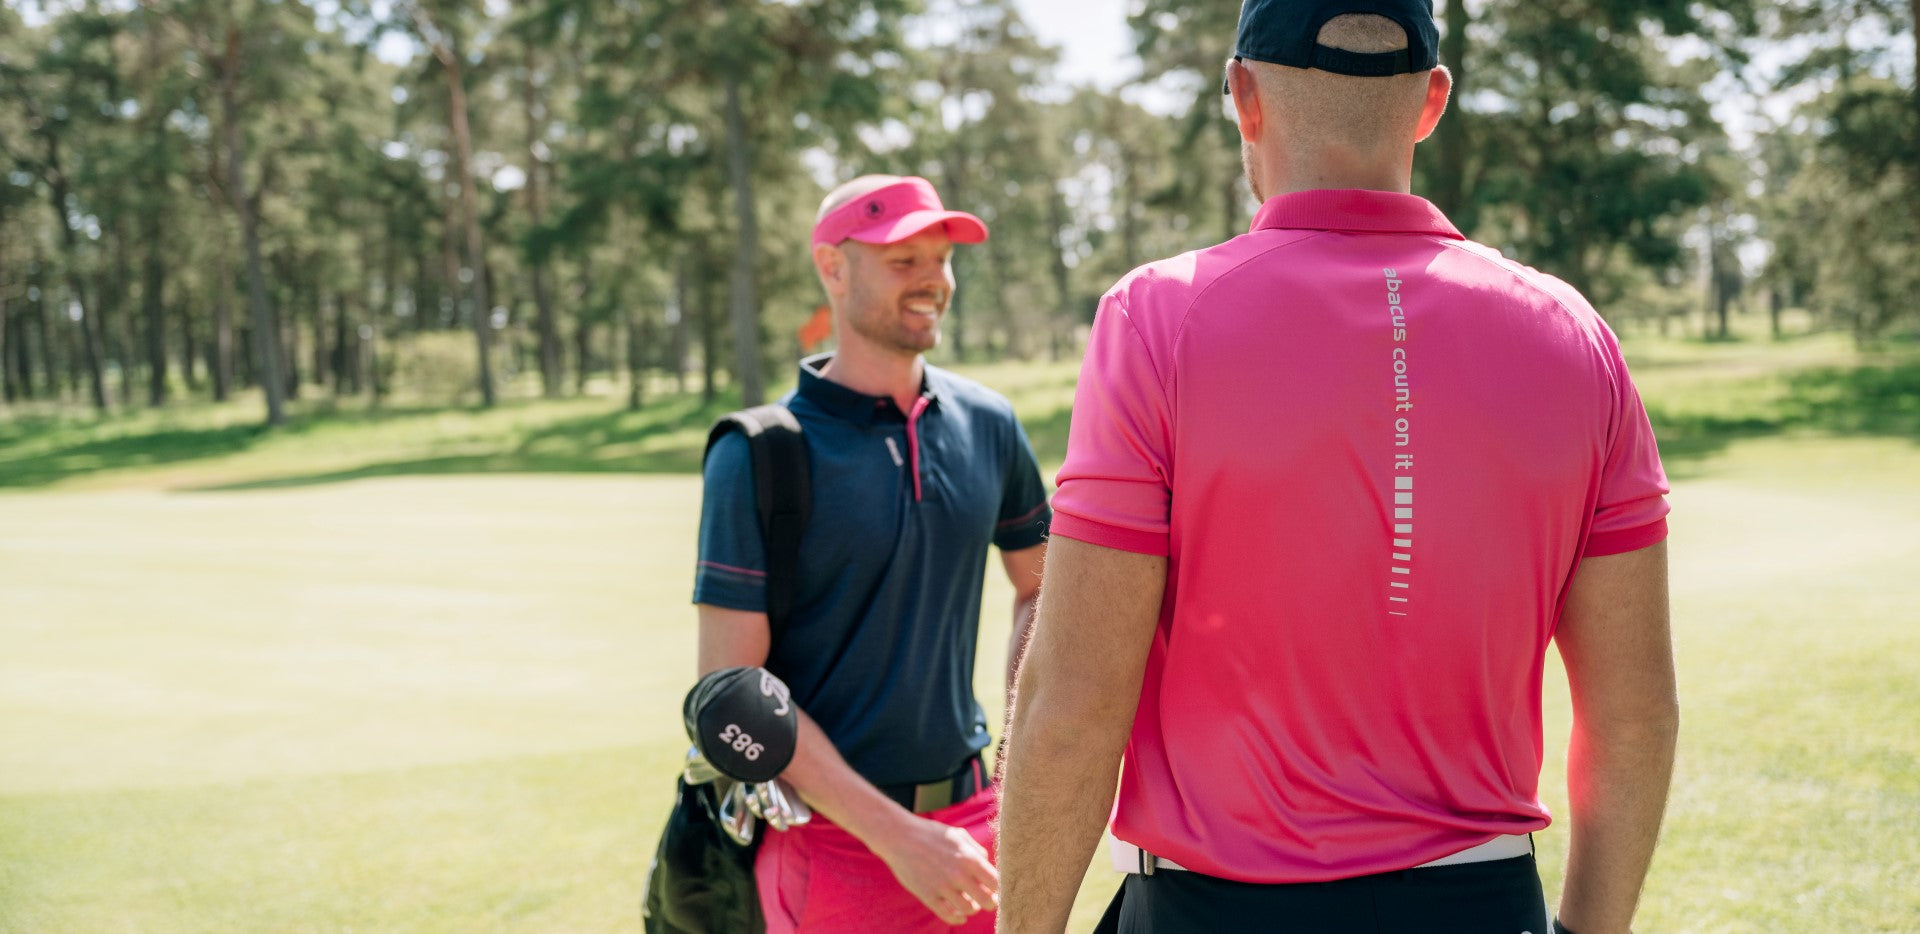 The Leading Golf Clothing Brands for Men, by AthleisureX